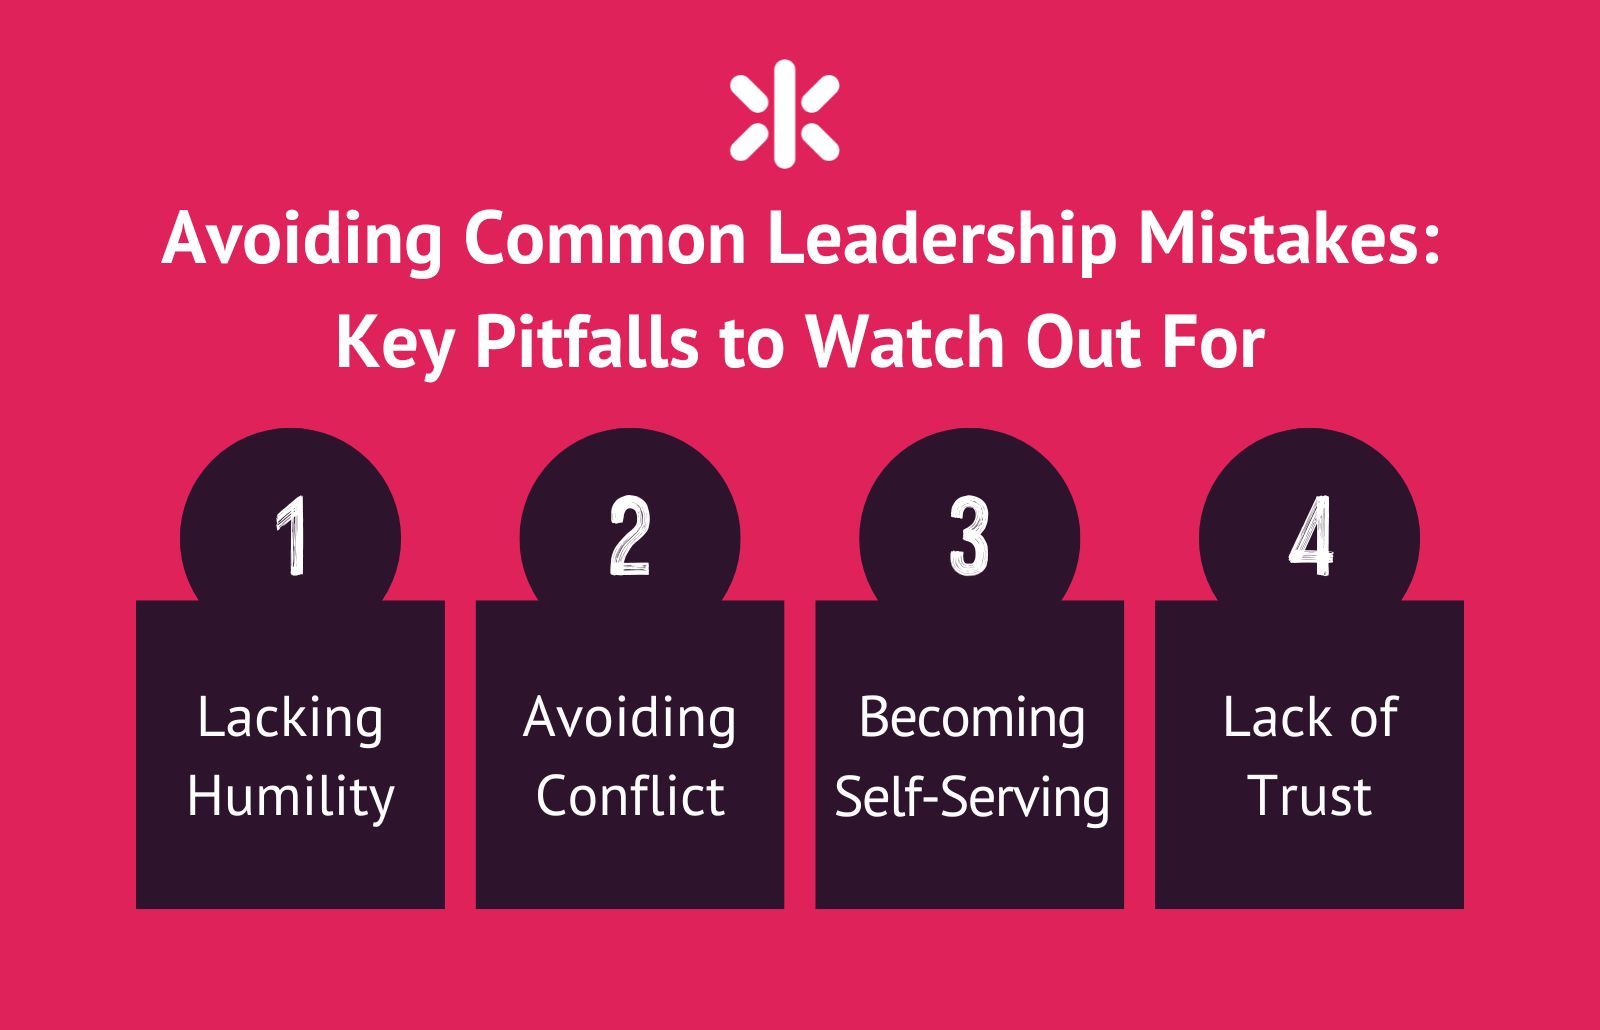 Avoiding Common Leadership Mistakes: Key Pitfalls to Watch Out For